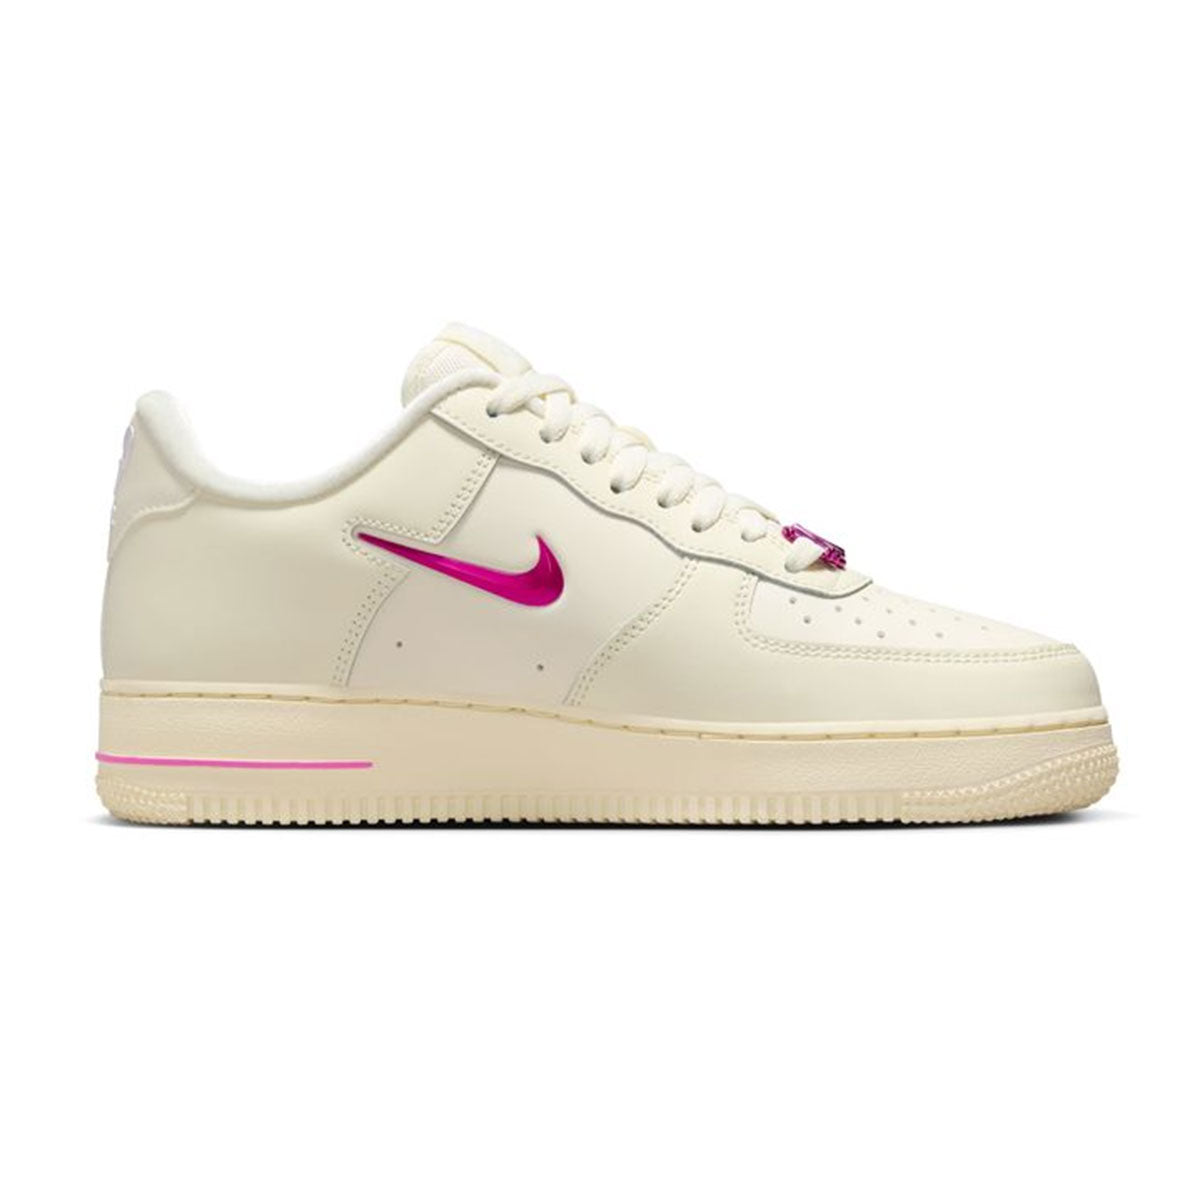 NIKE WMNS AIR FORCE 1 '07 SE JUST DO IT Nike Women's Air Force 1 '07 SE Just Do It [FB8251-101]